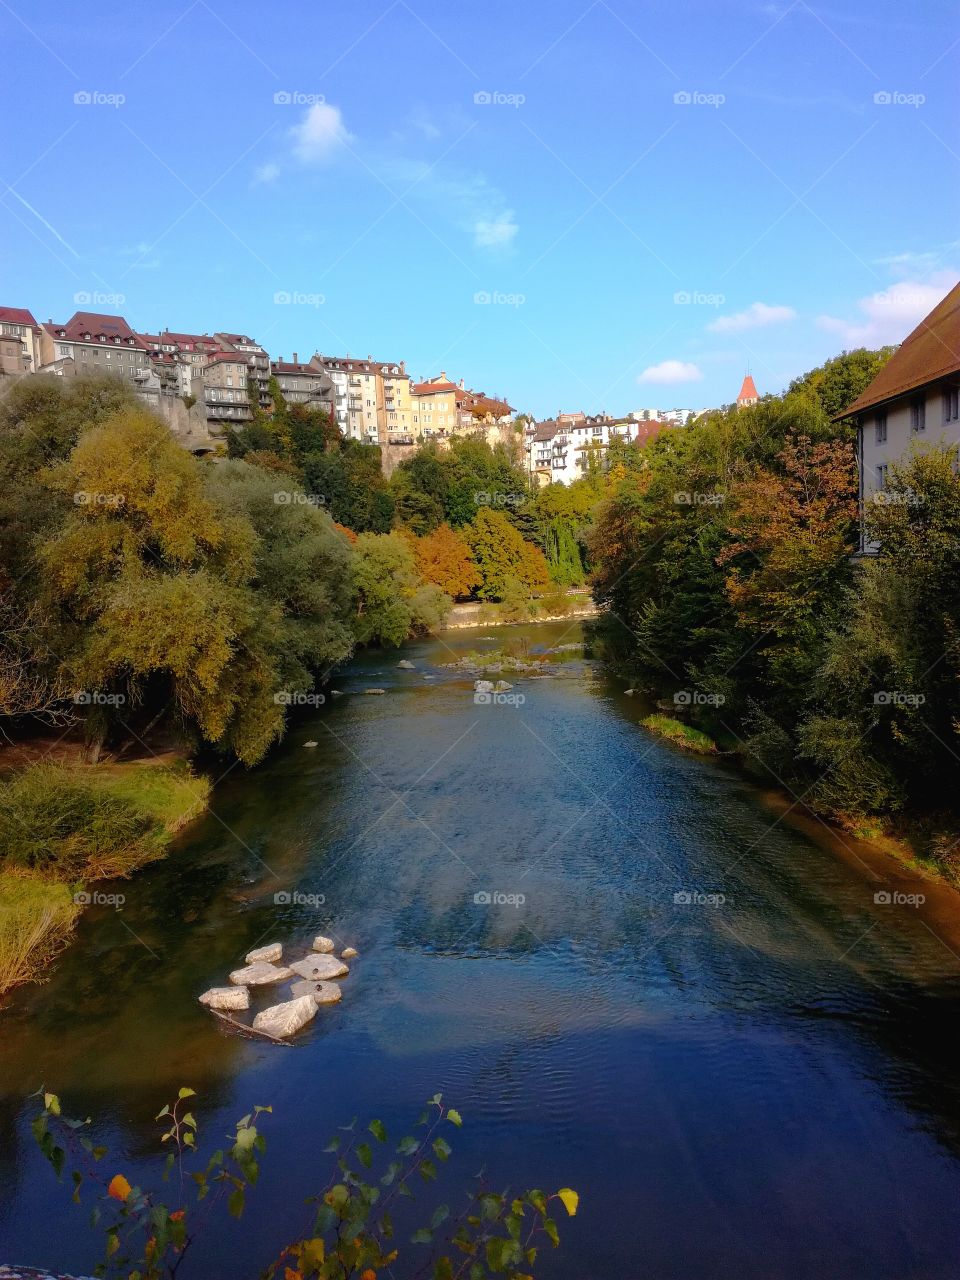 Really beautiful scenary from Fribourg